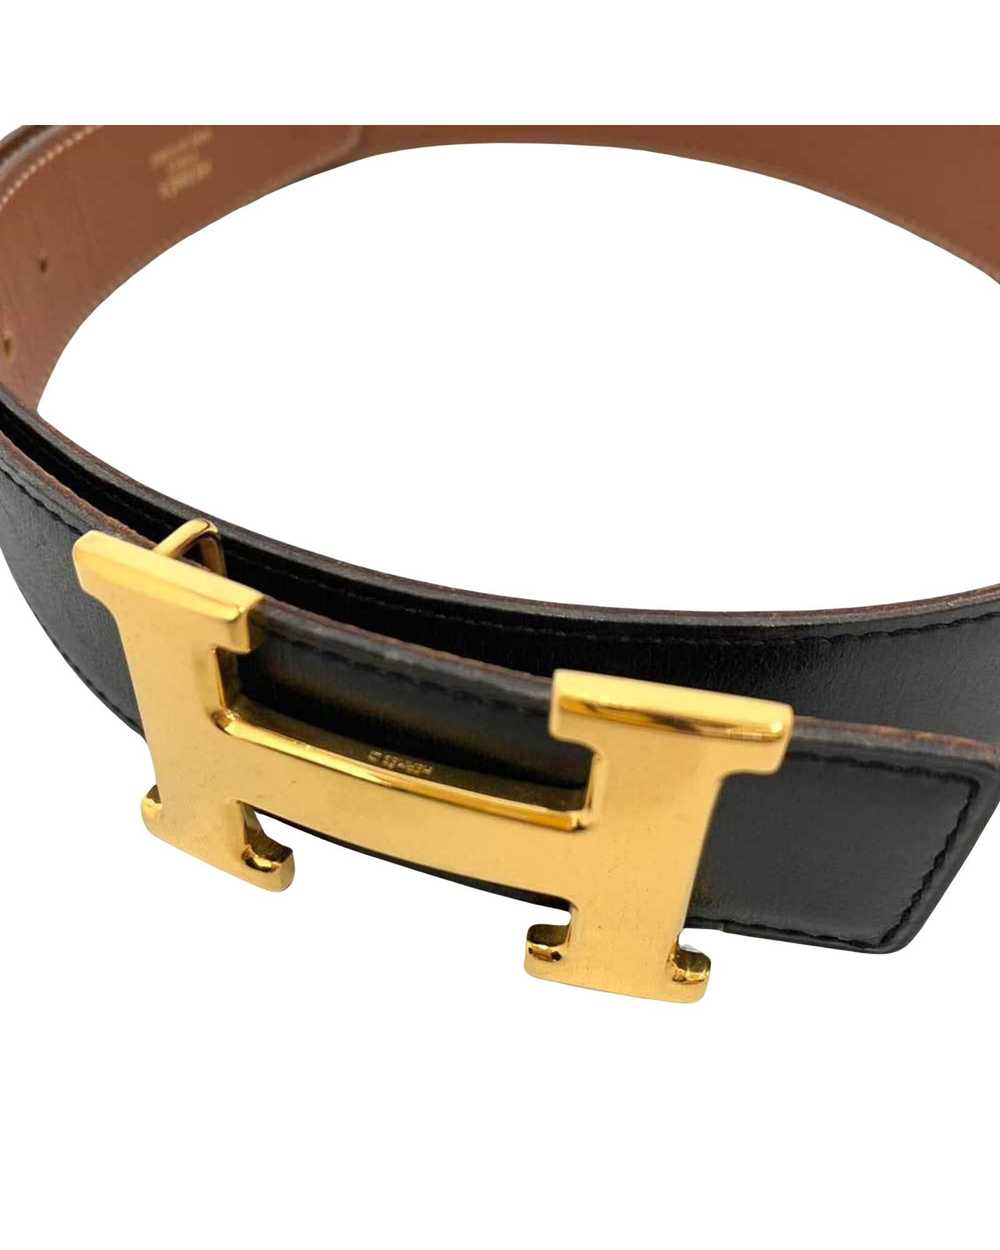 Hermes Reversible Leather Belt in Classic Shades … - image 2